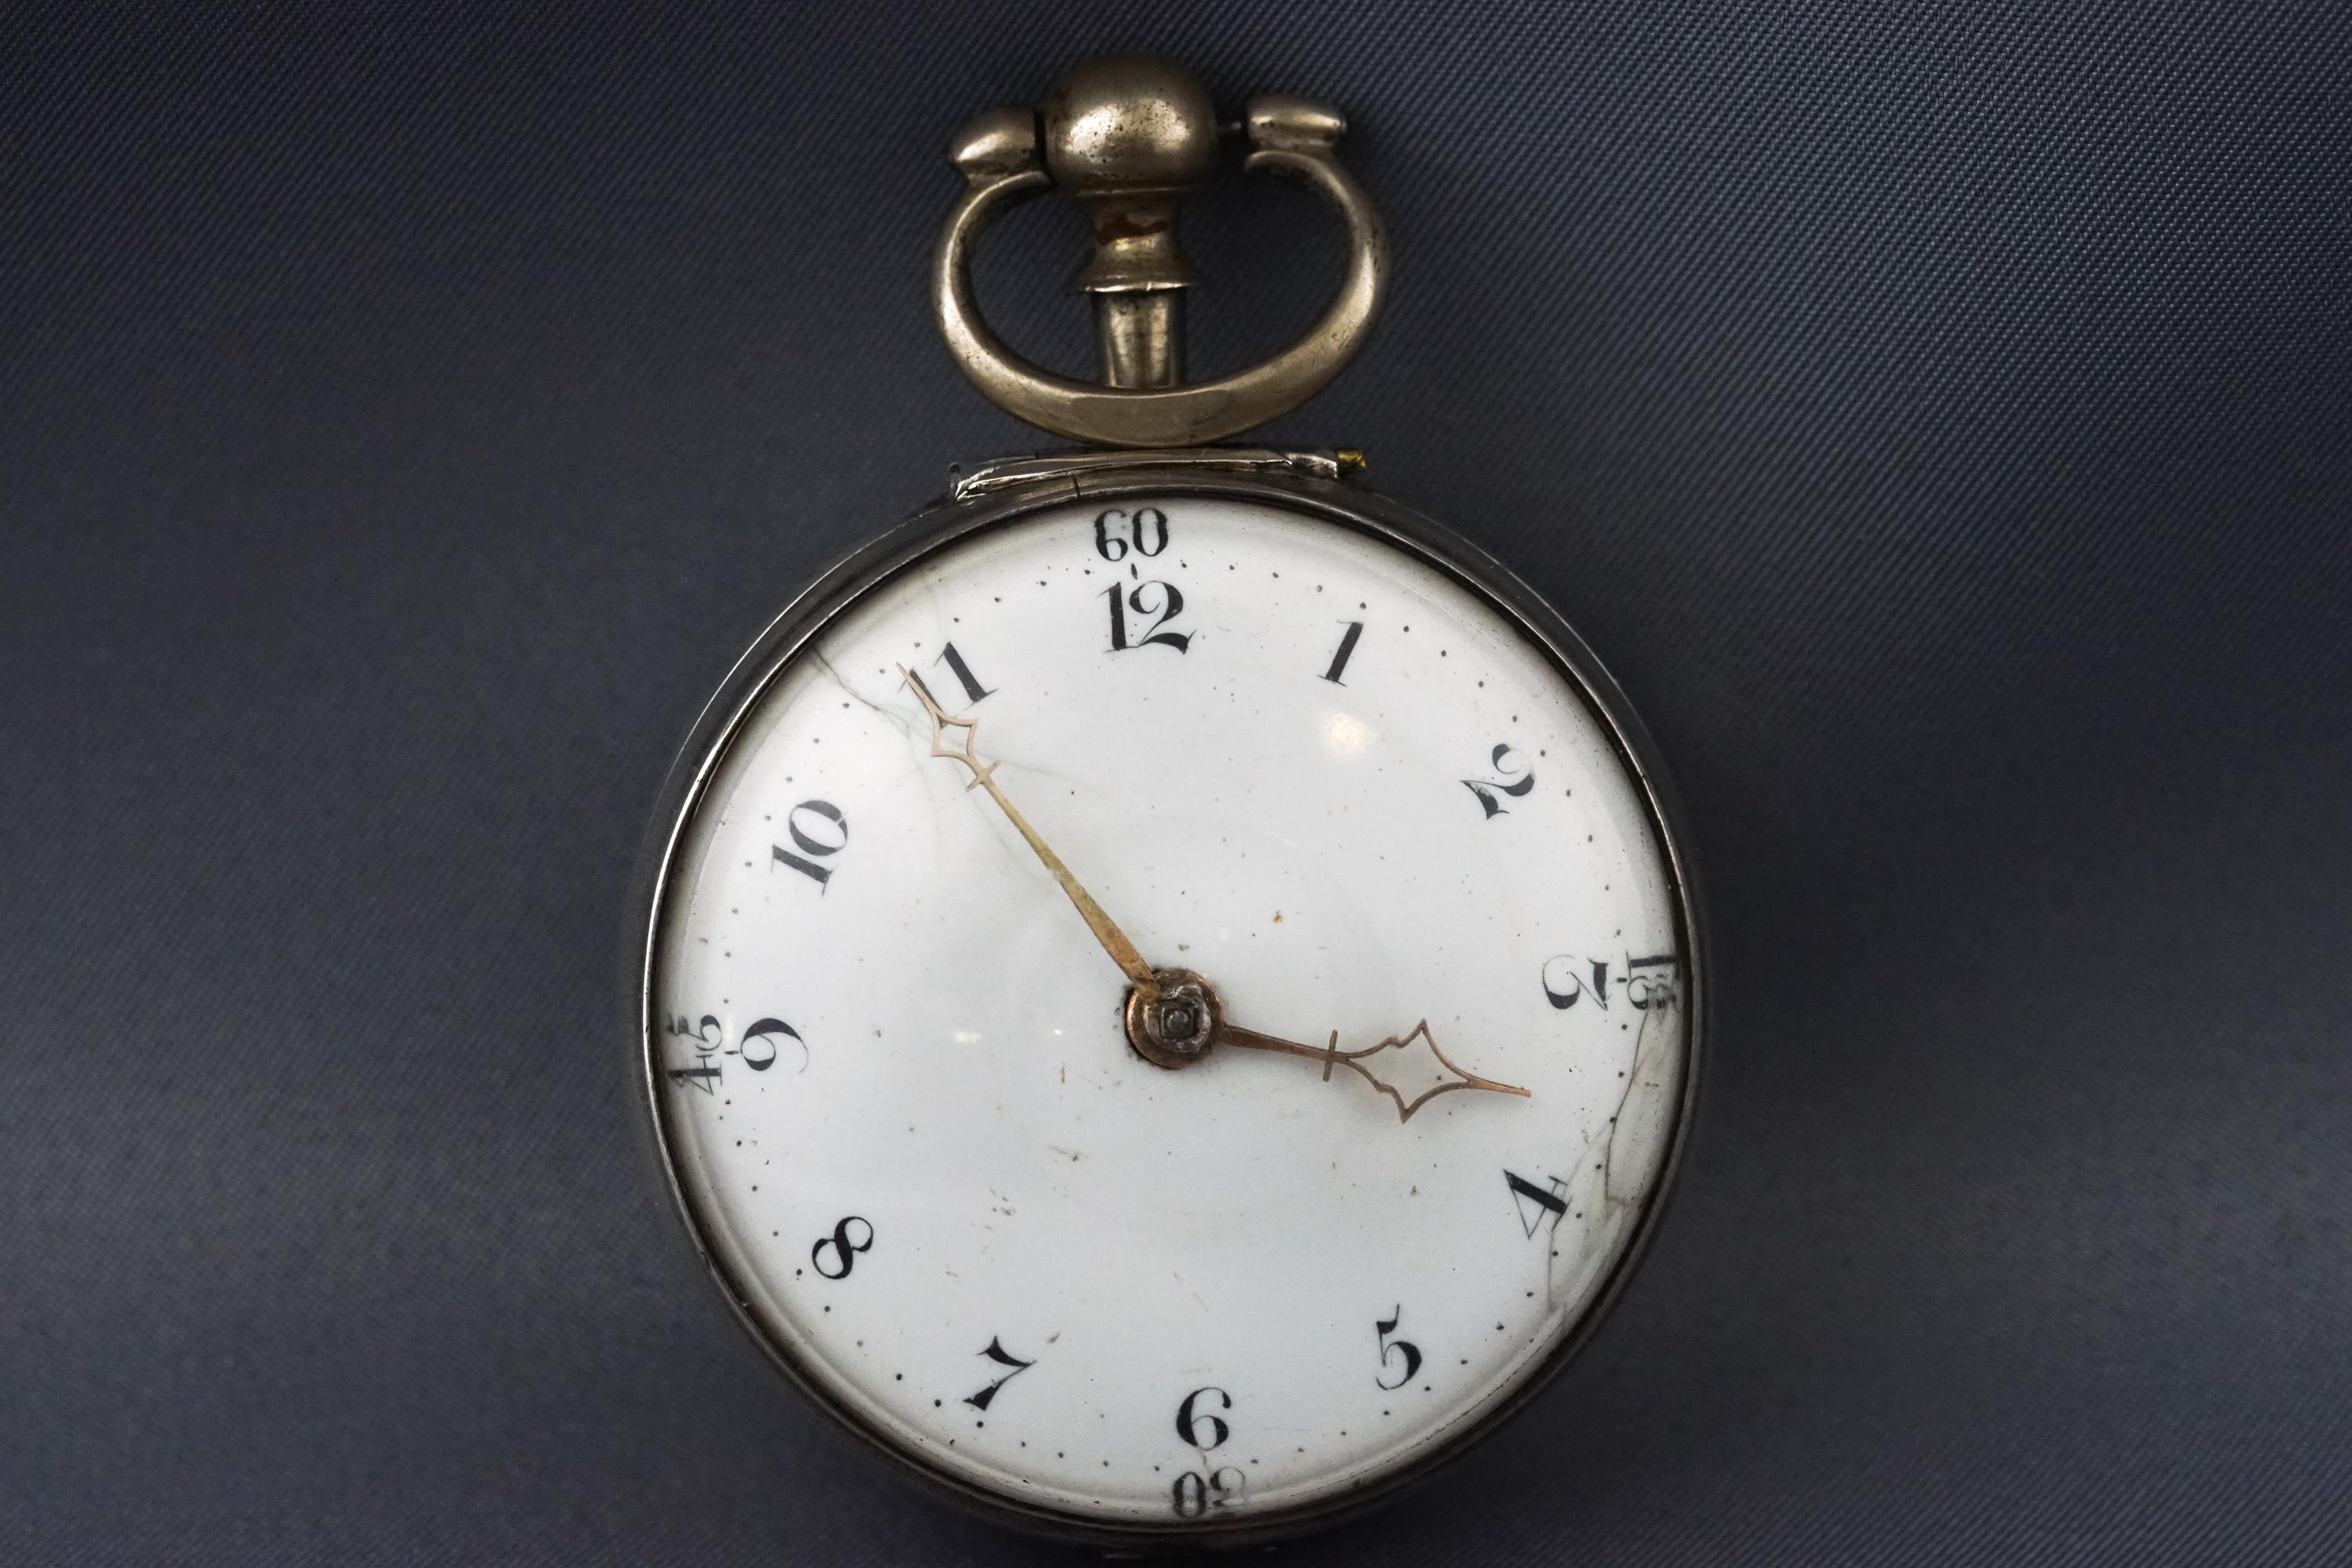 A open face key wound pocket watch with additional outer case, hallmarked sterling silver, London, - Image 2 of 3